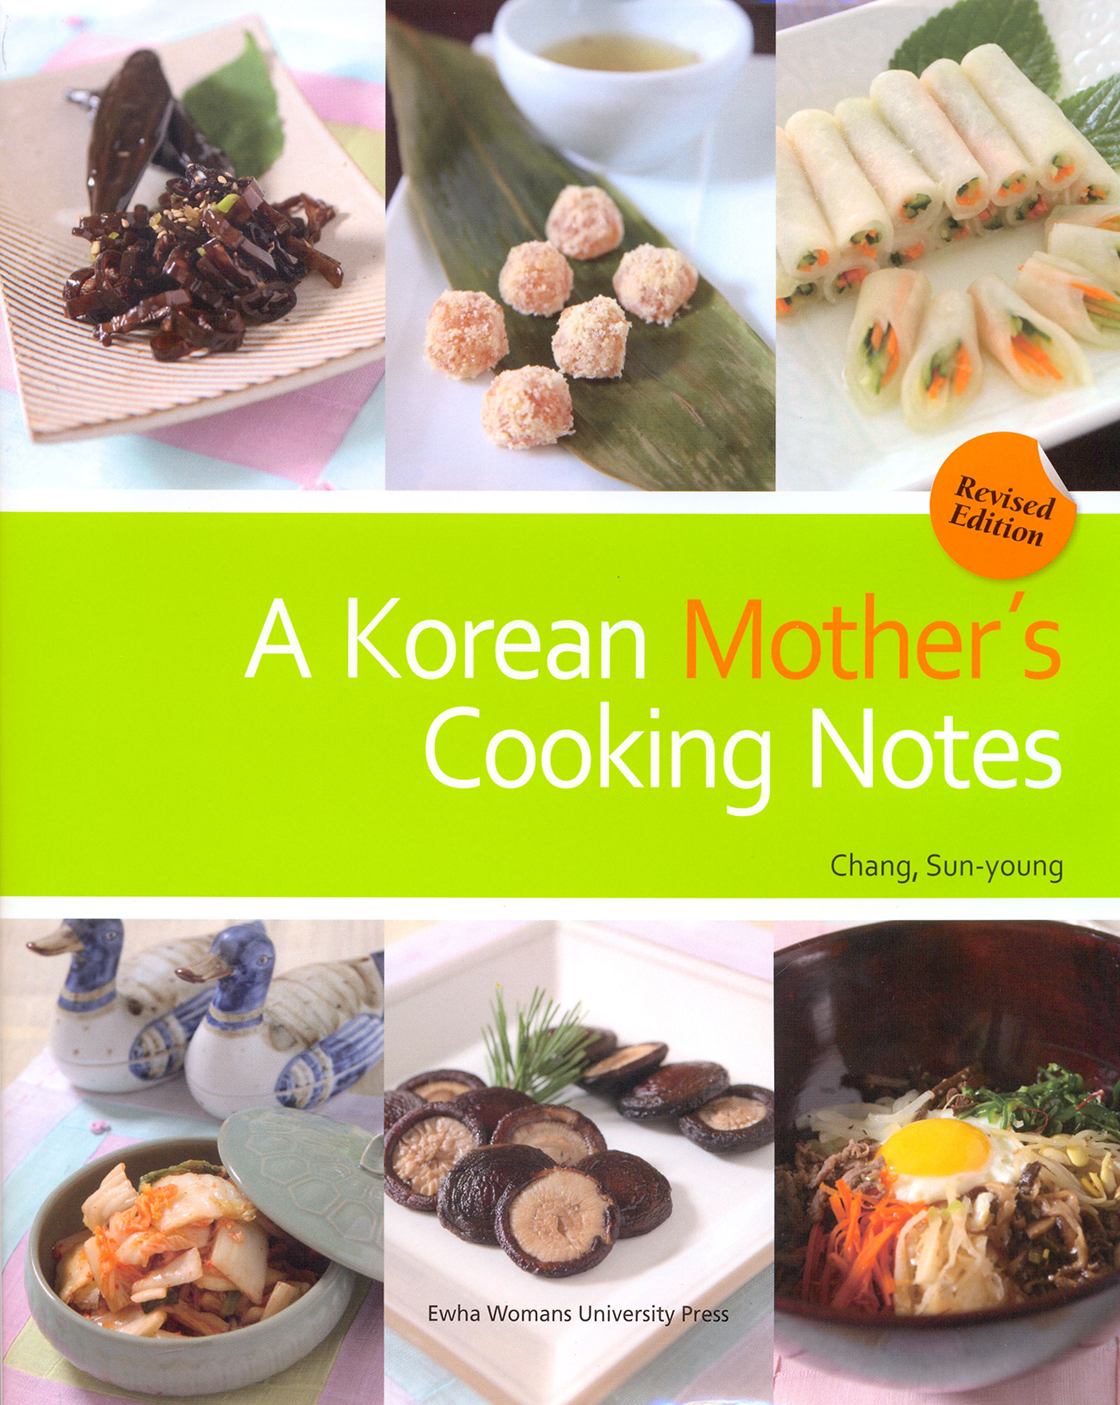 [EBOOK] A Korean Mother's Cooking Notes (Revised Edition)  도서이미지